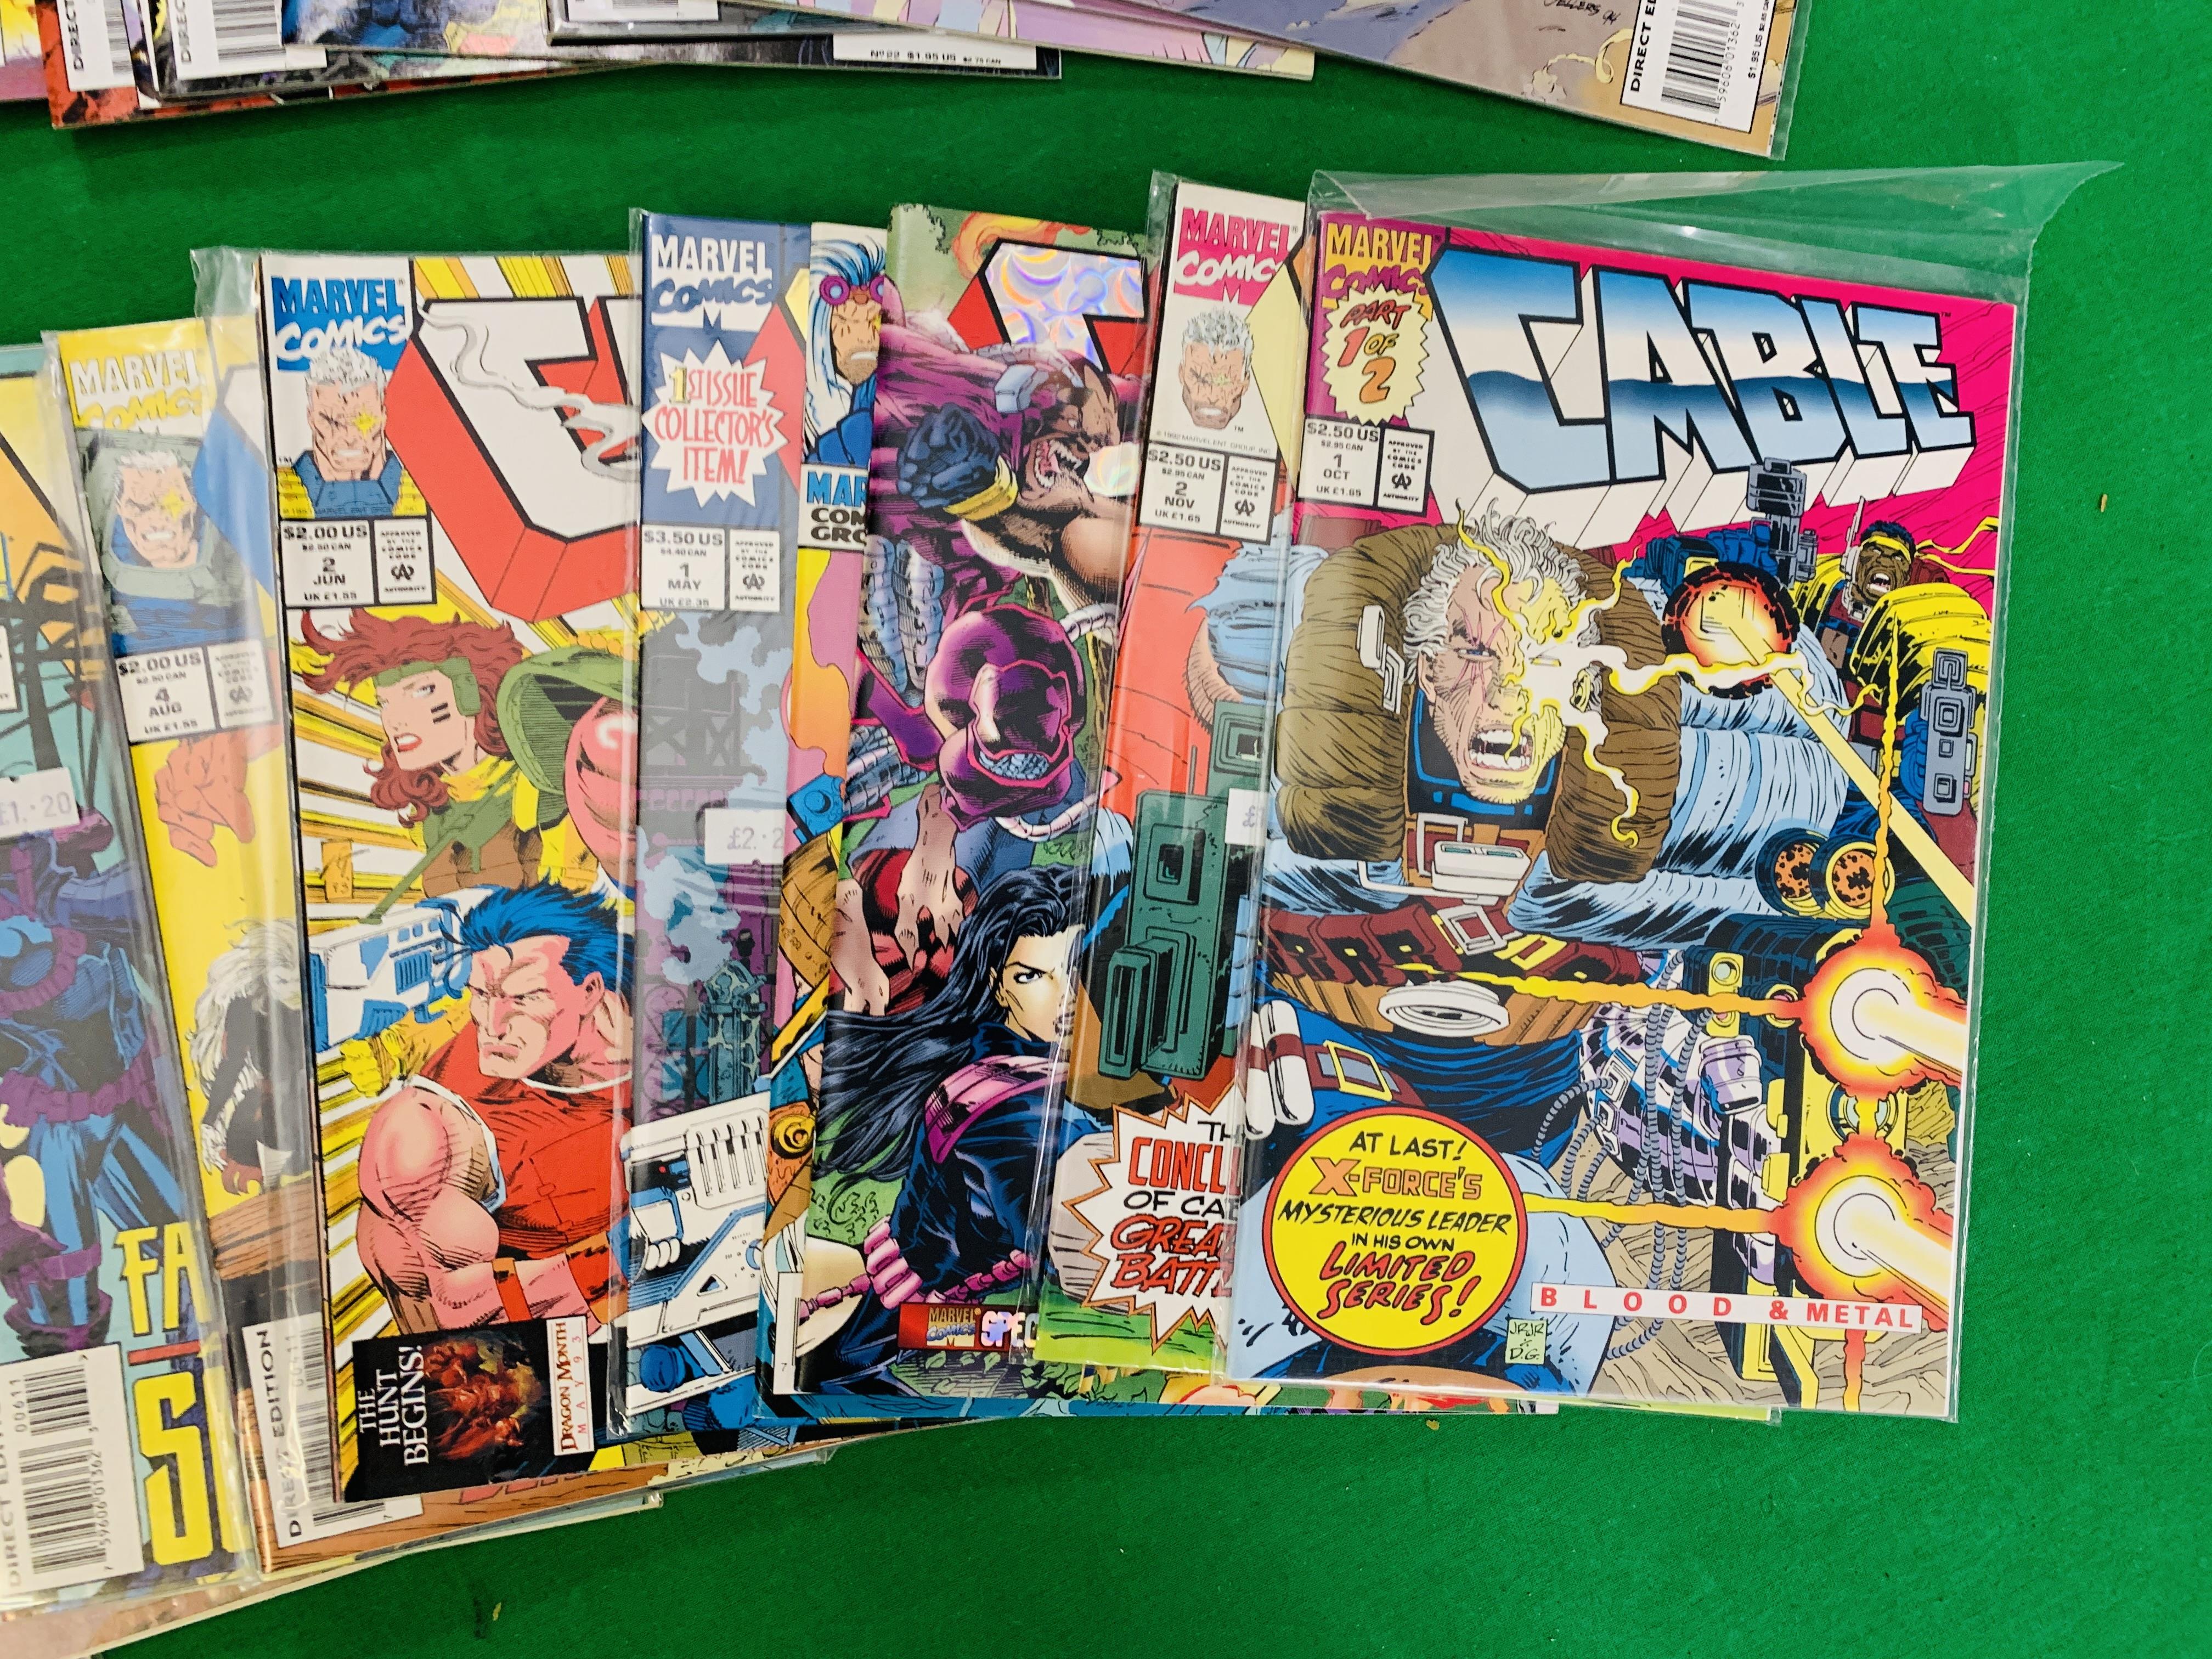 MARVEL COMICS CABLE NO. 1 - 40 FROM 1993. MISSING NO. 25. LIMITED RUN PLUS FLASHBACK. NO. - Image 3 of 7